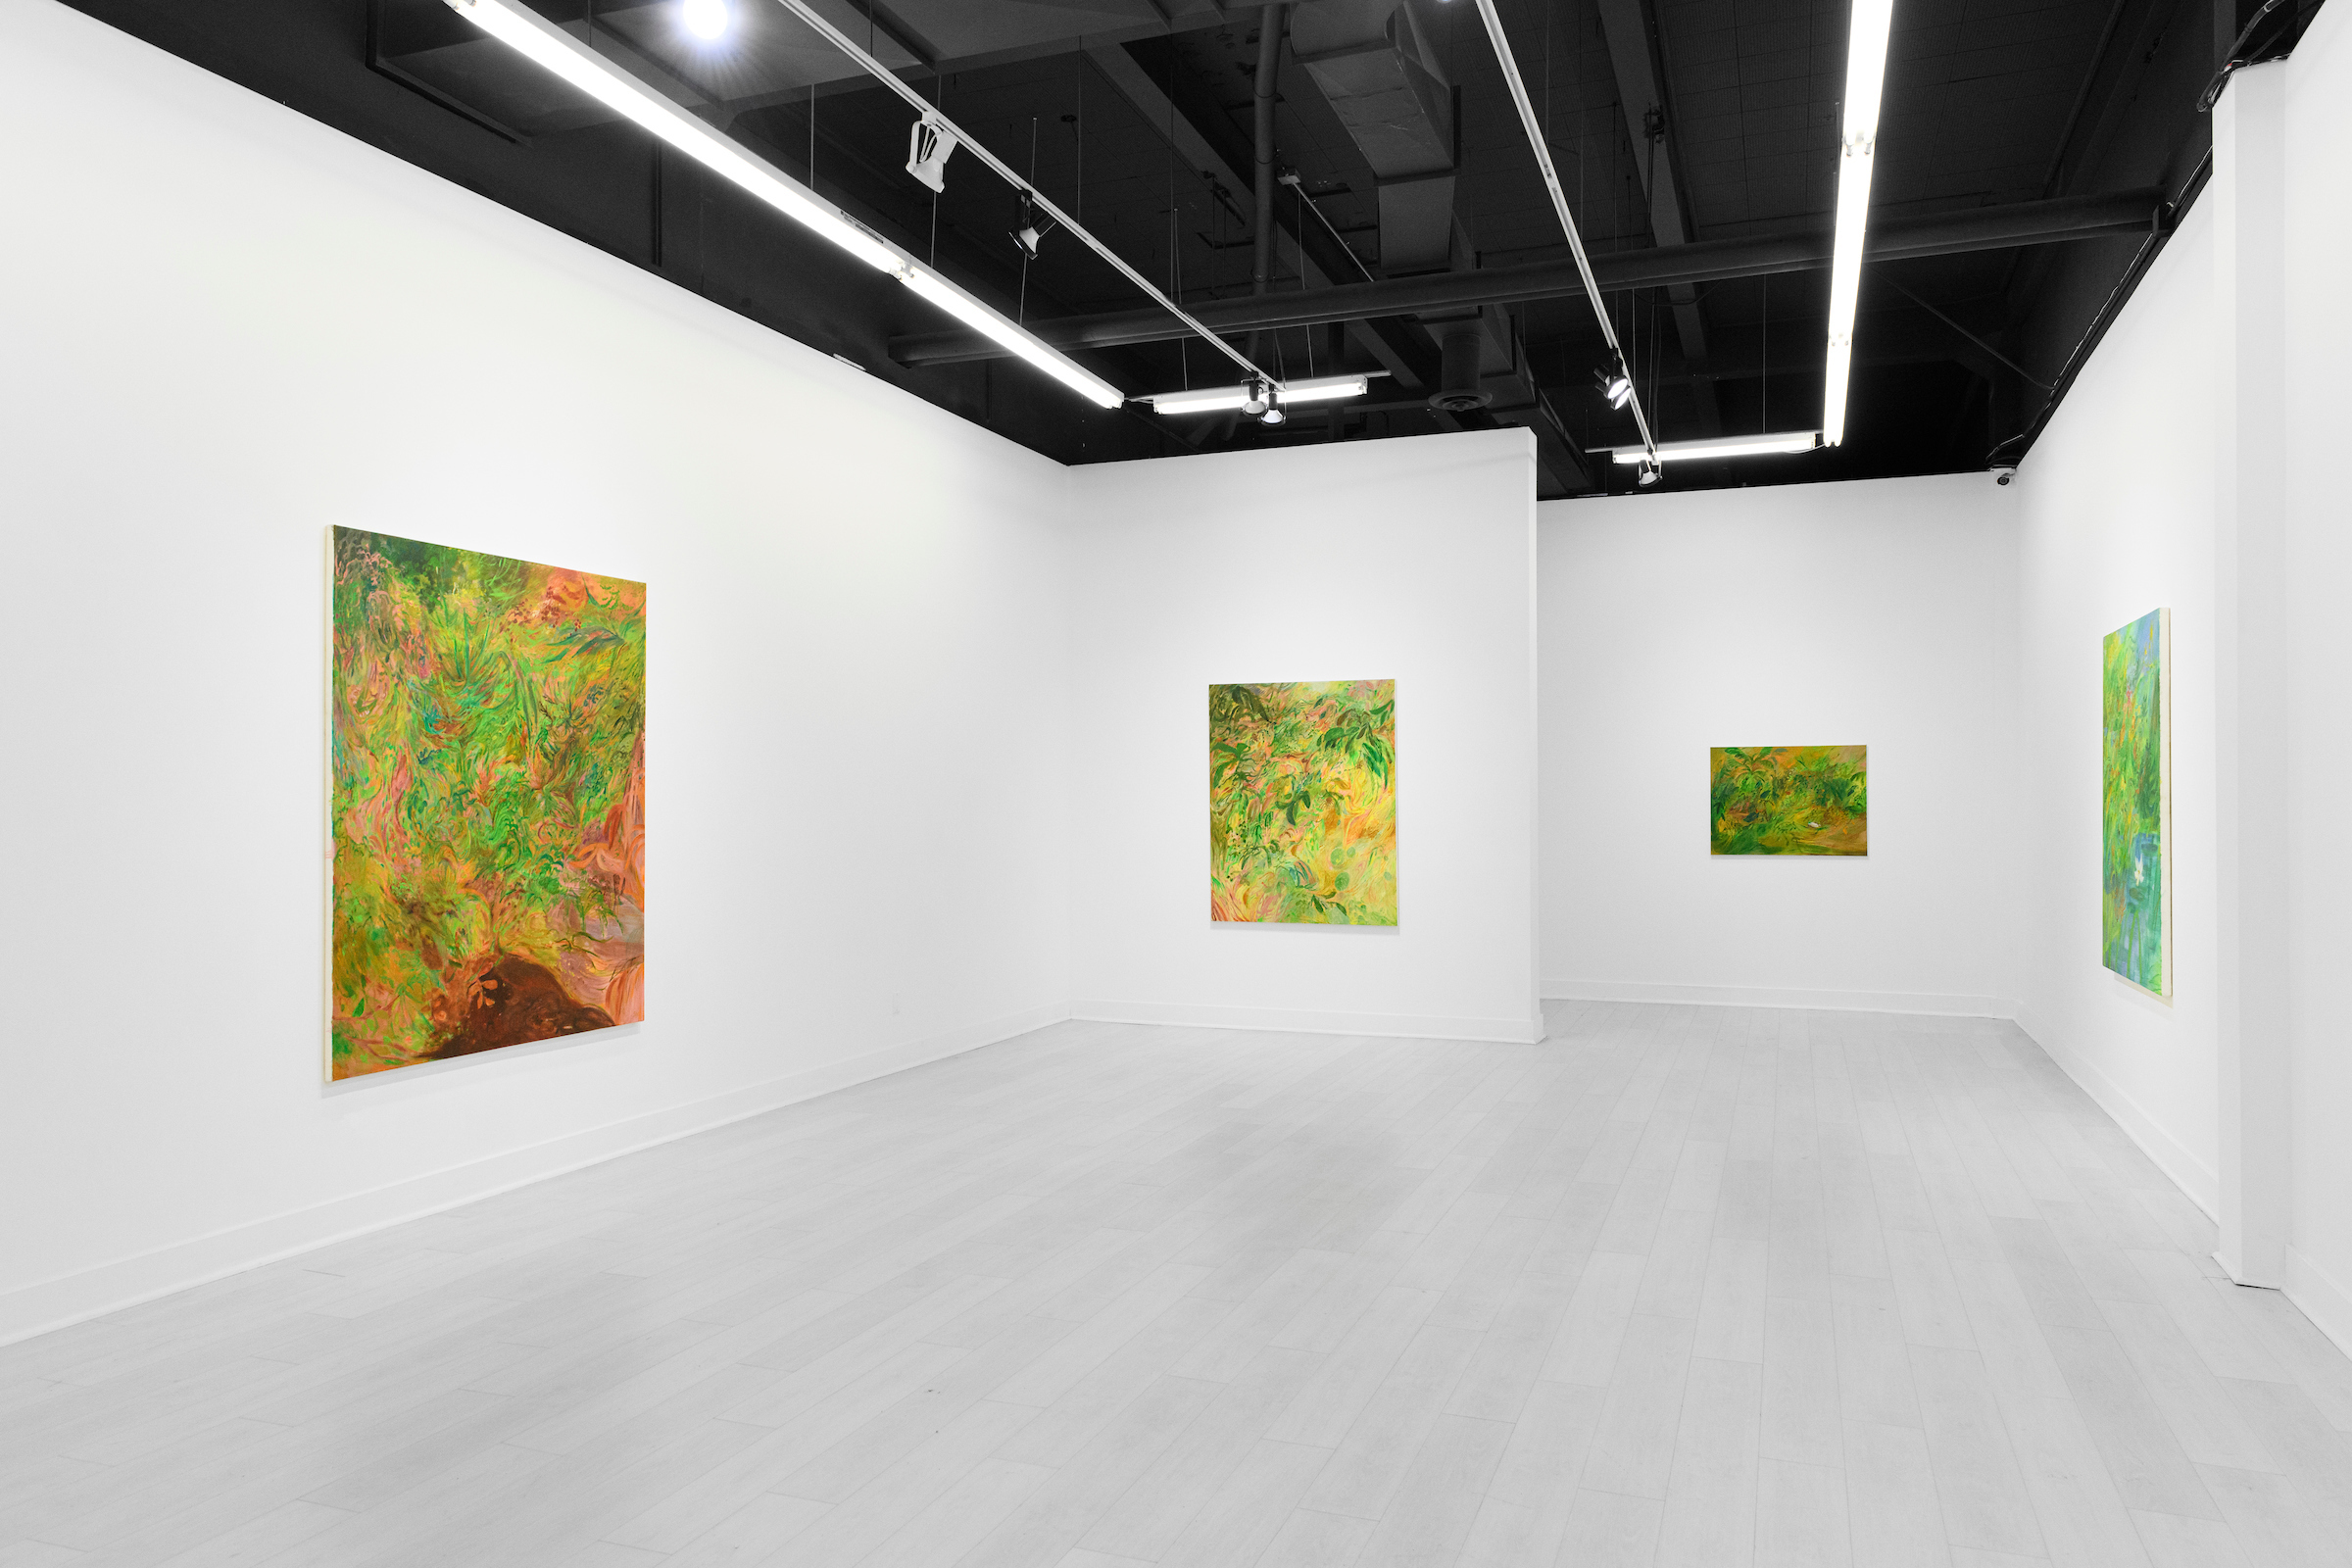 Image: Installation View, Searching for Stars, 2022, pt.2 Gallery, Oakland, CA. White-walled gallery space with three of Netrabile's abstracted nature scenes on the wall. Courtesy of Soumya Netrabile and pt.2 Gallery.